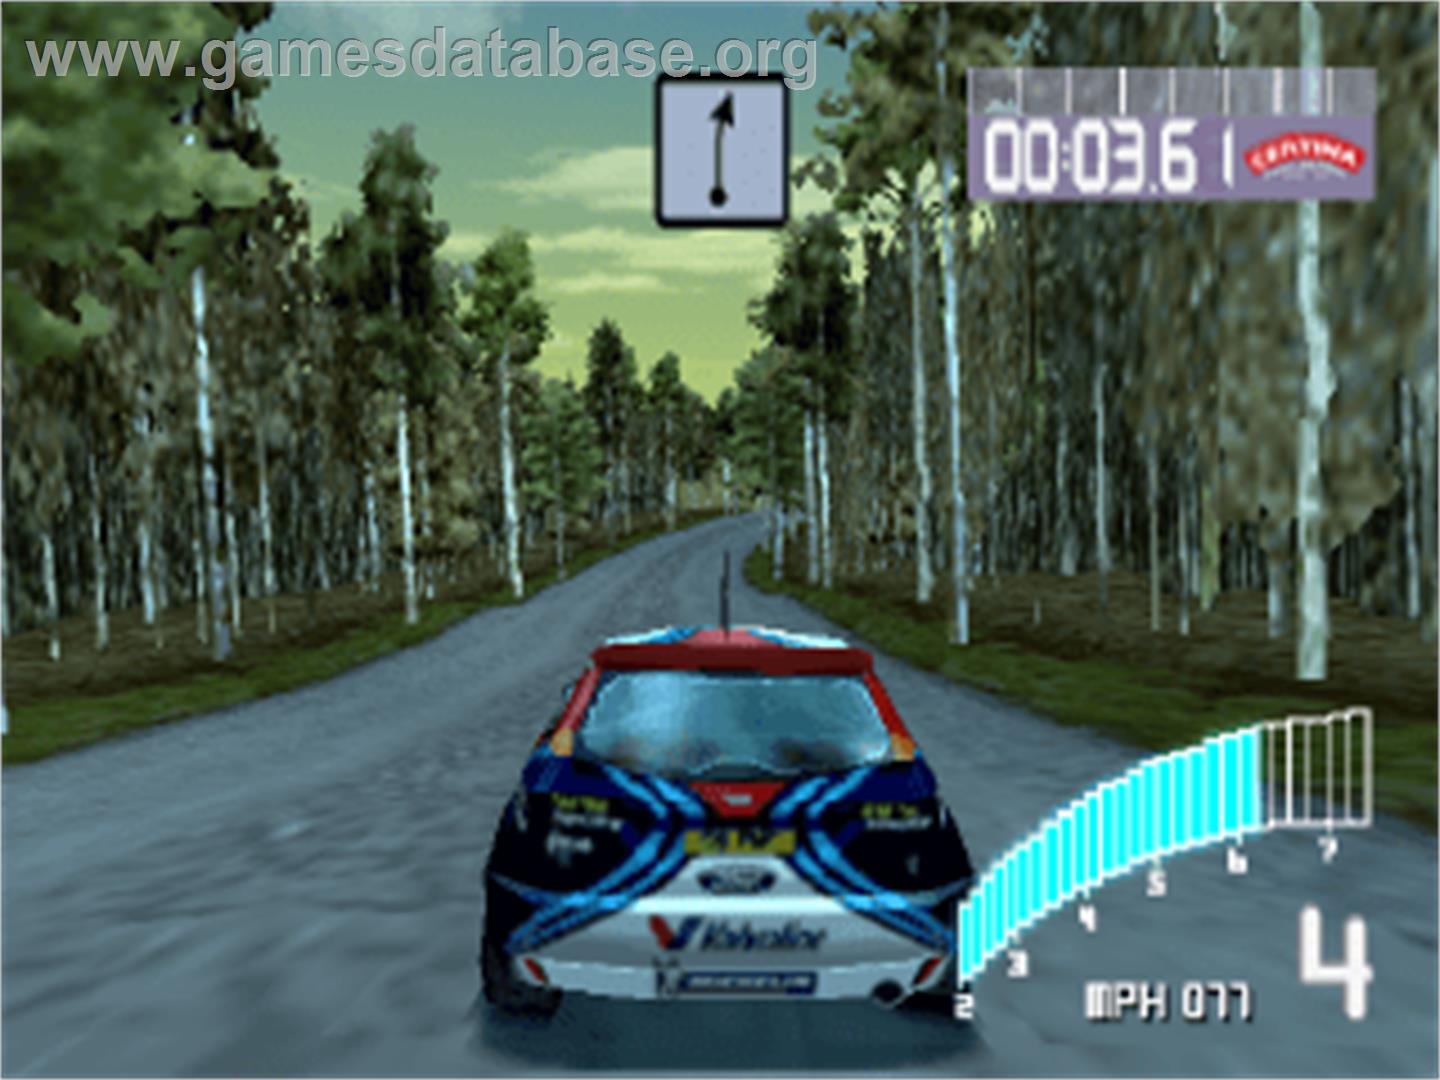 Colin McRae Rally 2.0 / No Fear Downhill Mountain Biking - Sony Playstation - Artwork - In Game